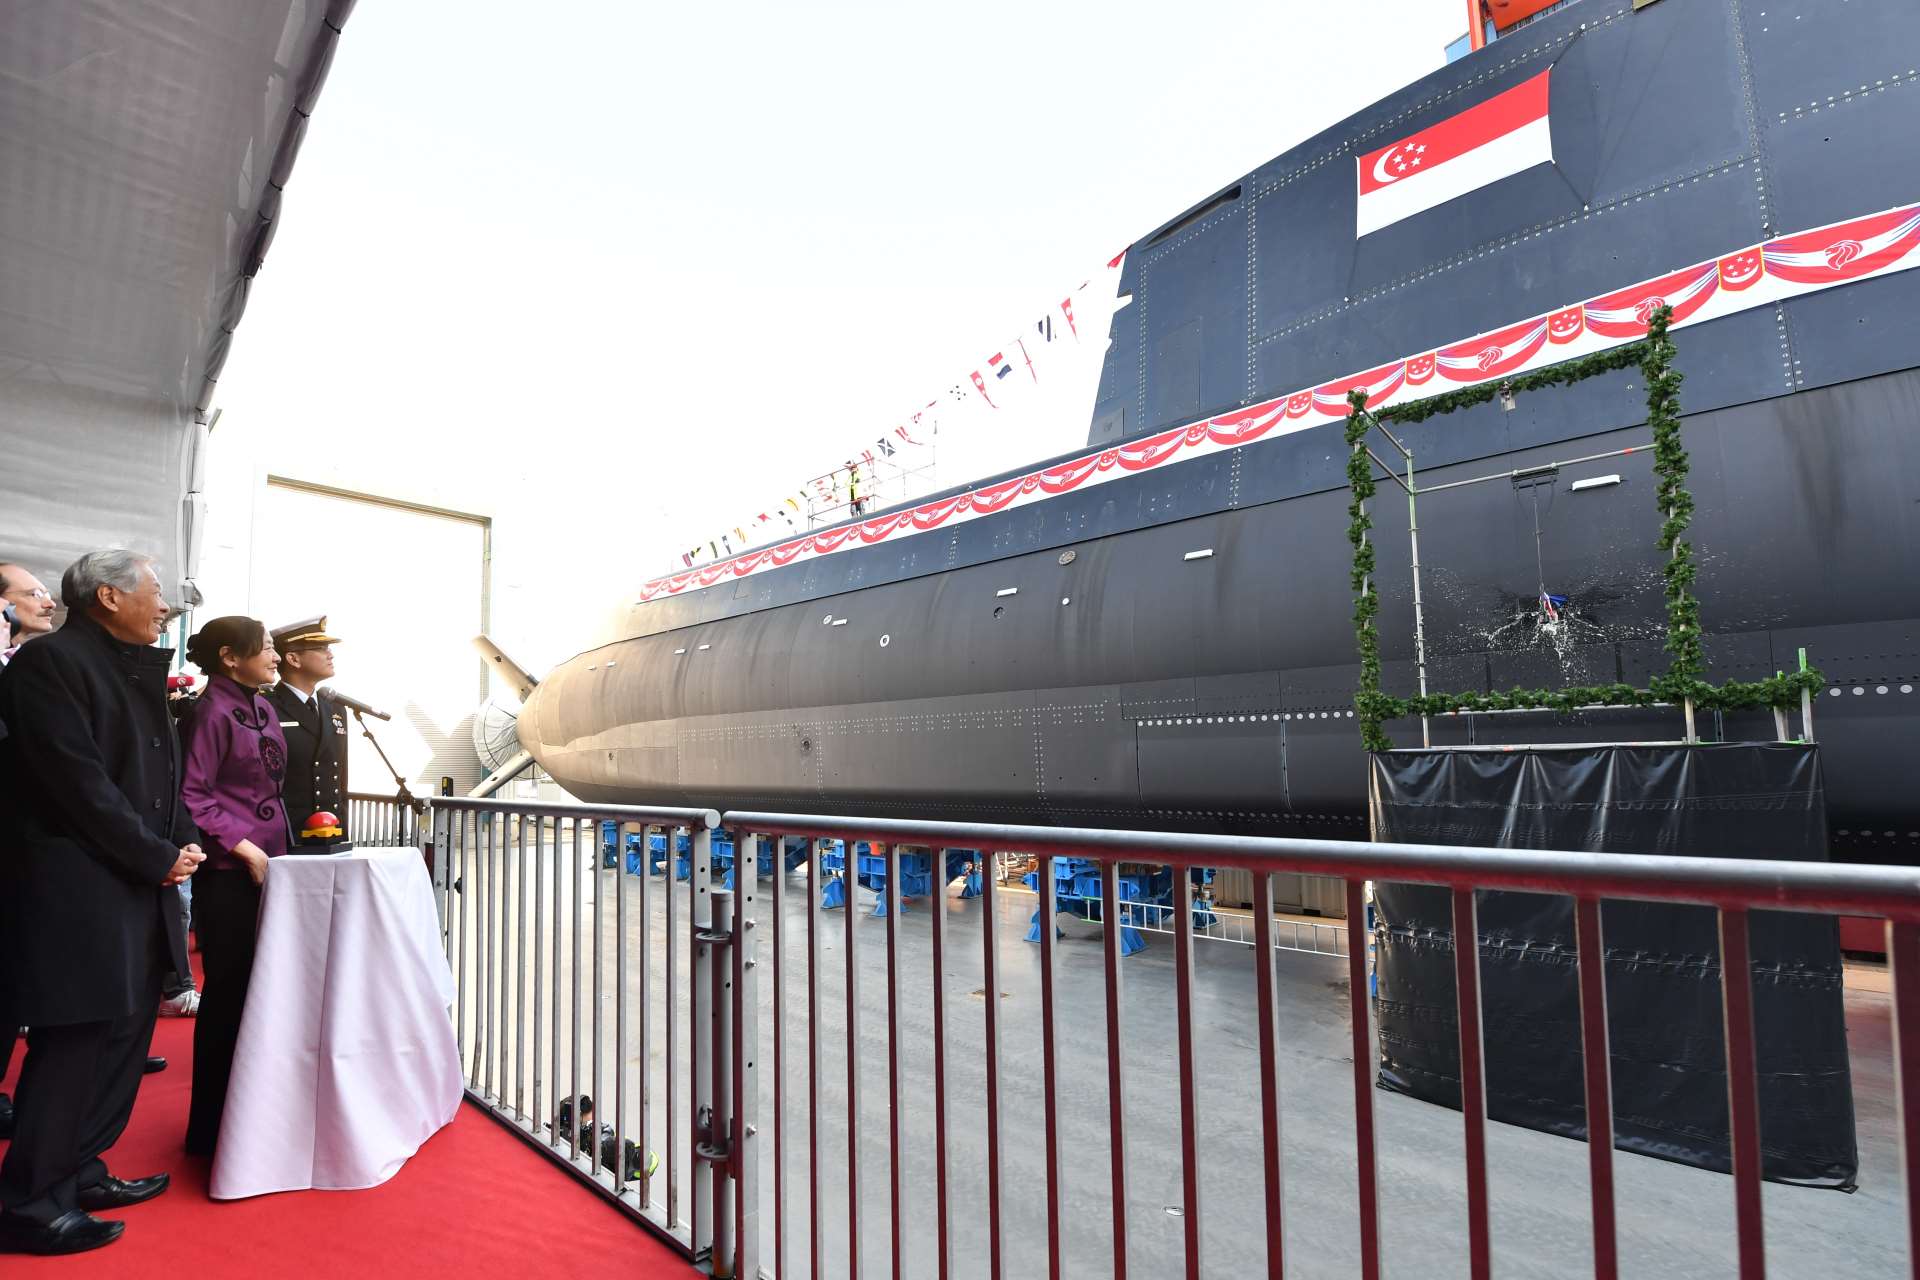 Mrs Ng, wife of Dr Ng, launching the submarine, Invincible, at the thyssenkrupp Marine Systems shipyard in Kiel, Germany.